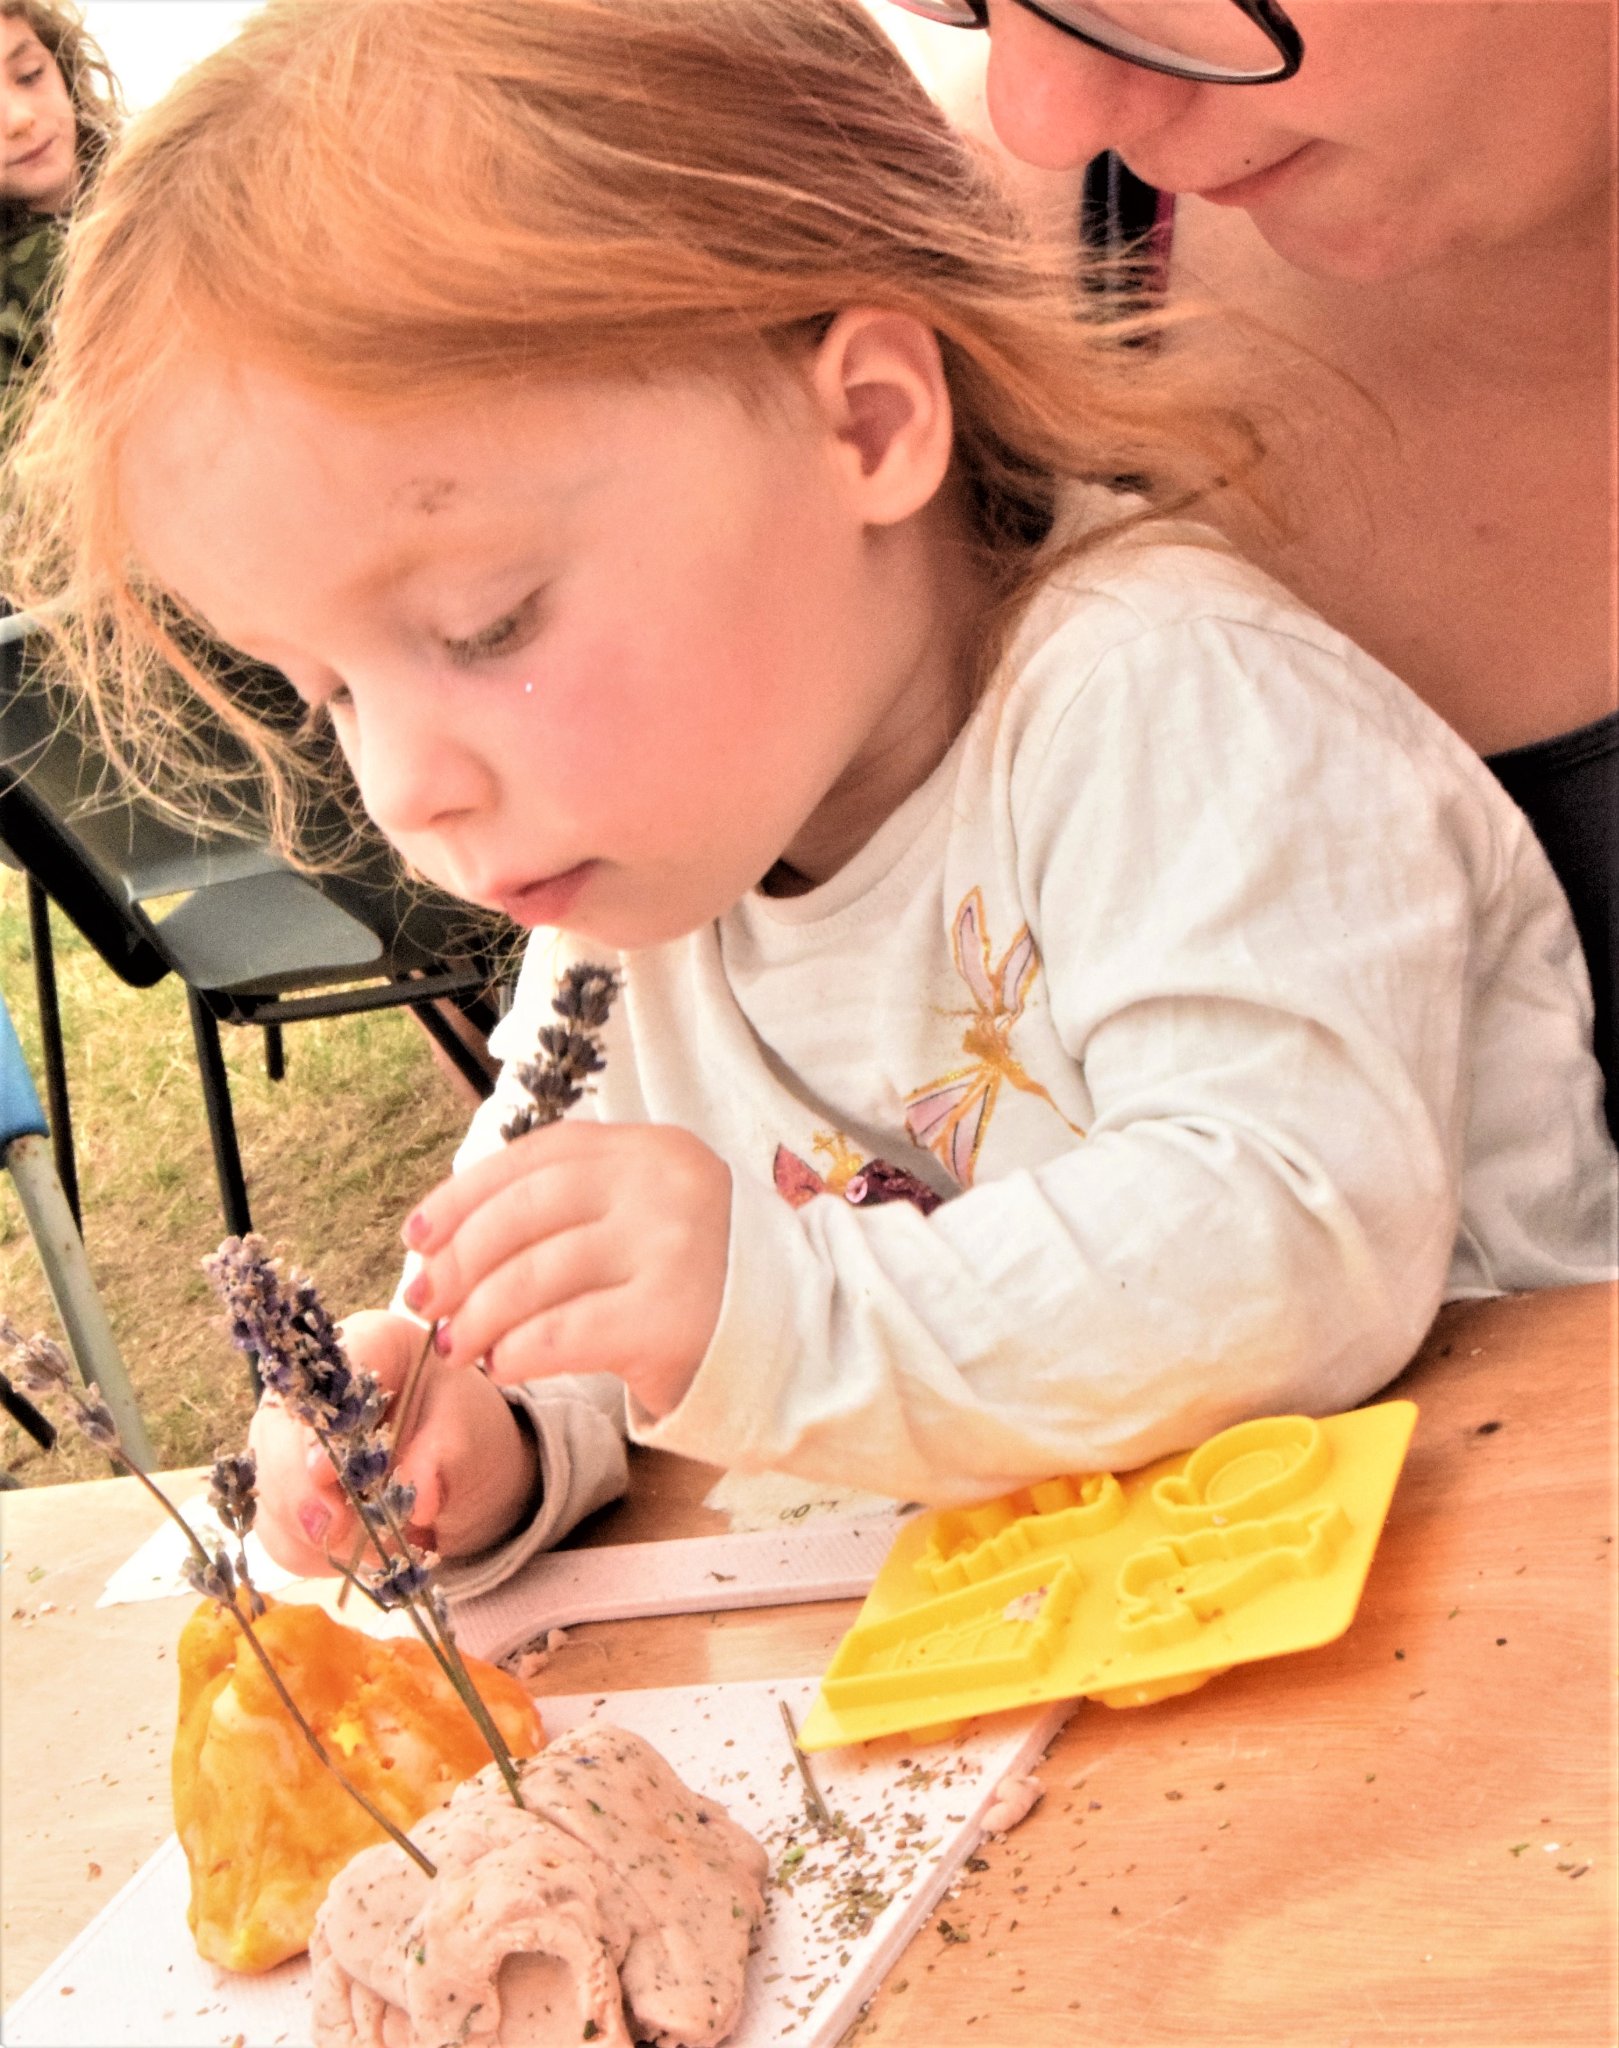 Photo of a young girl playing with play dough scented with lavender